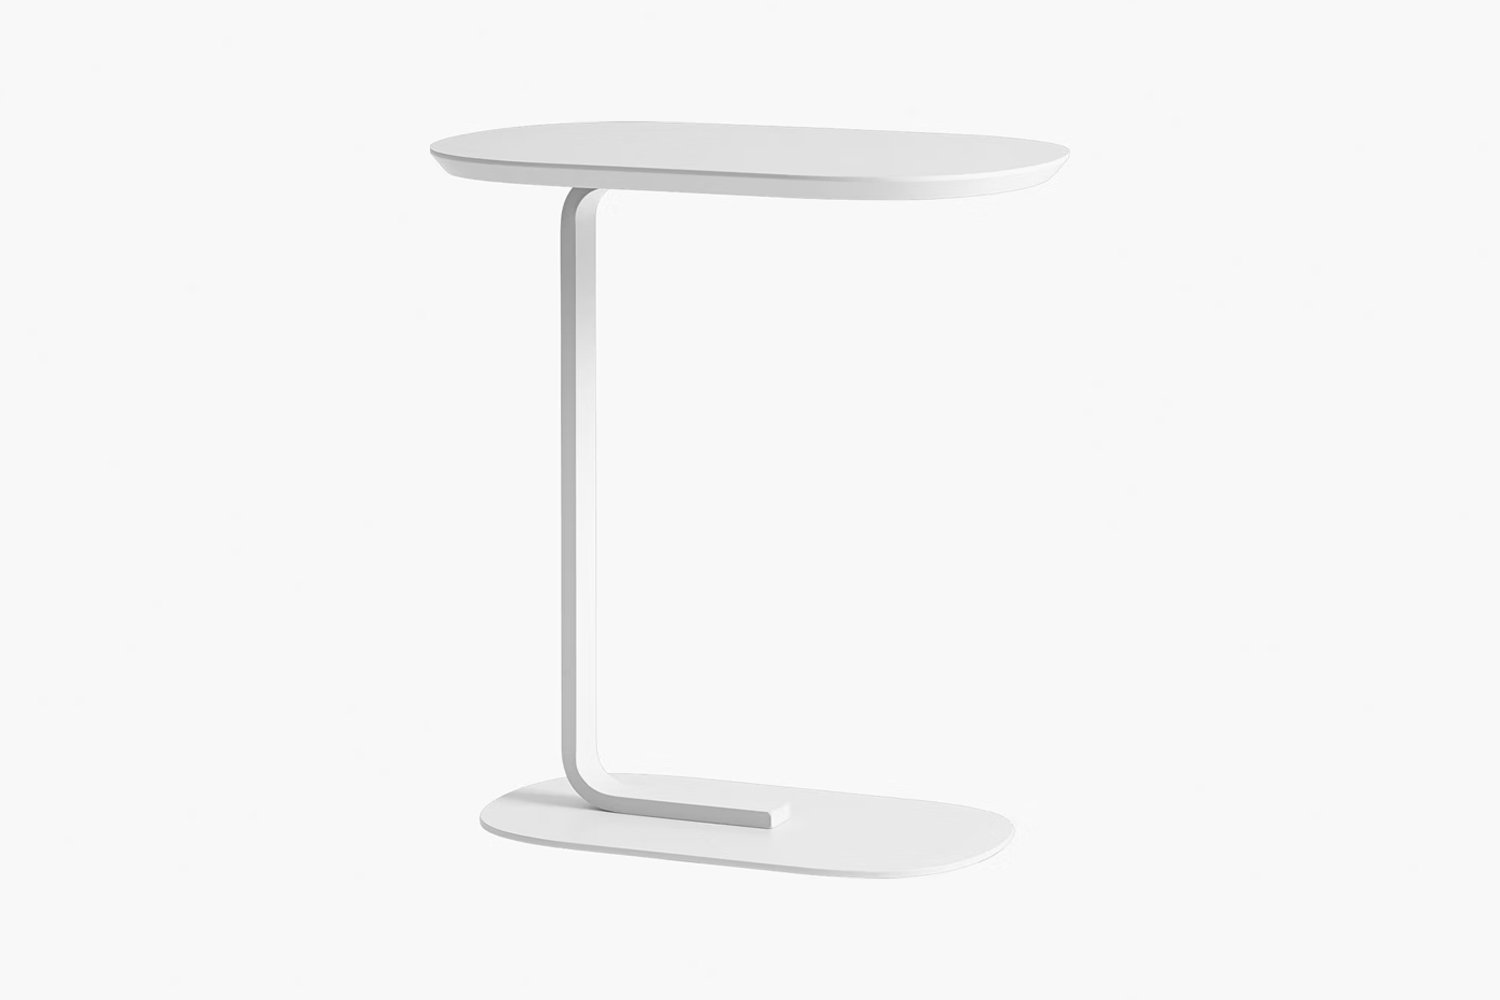 designed by muuto, the relate side table comes in off white (shown), black, blu 11